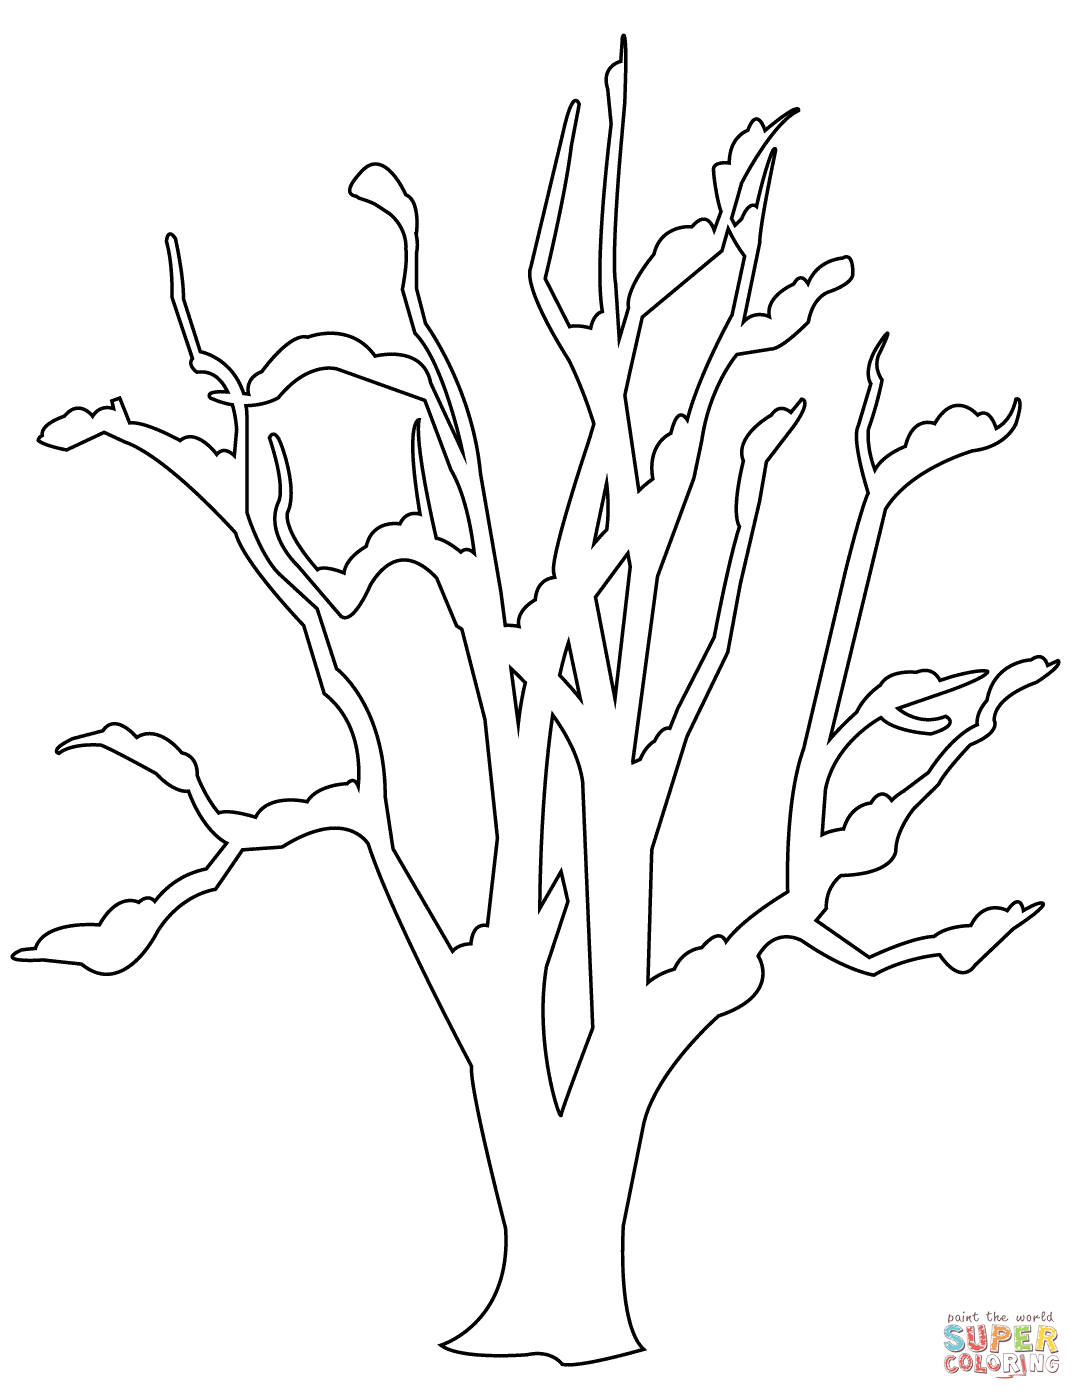 Bare trees coloring pages | Free Printable Pictures